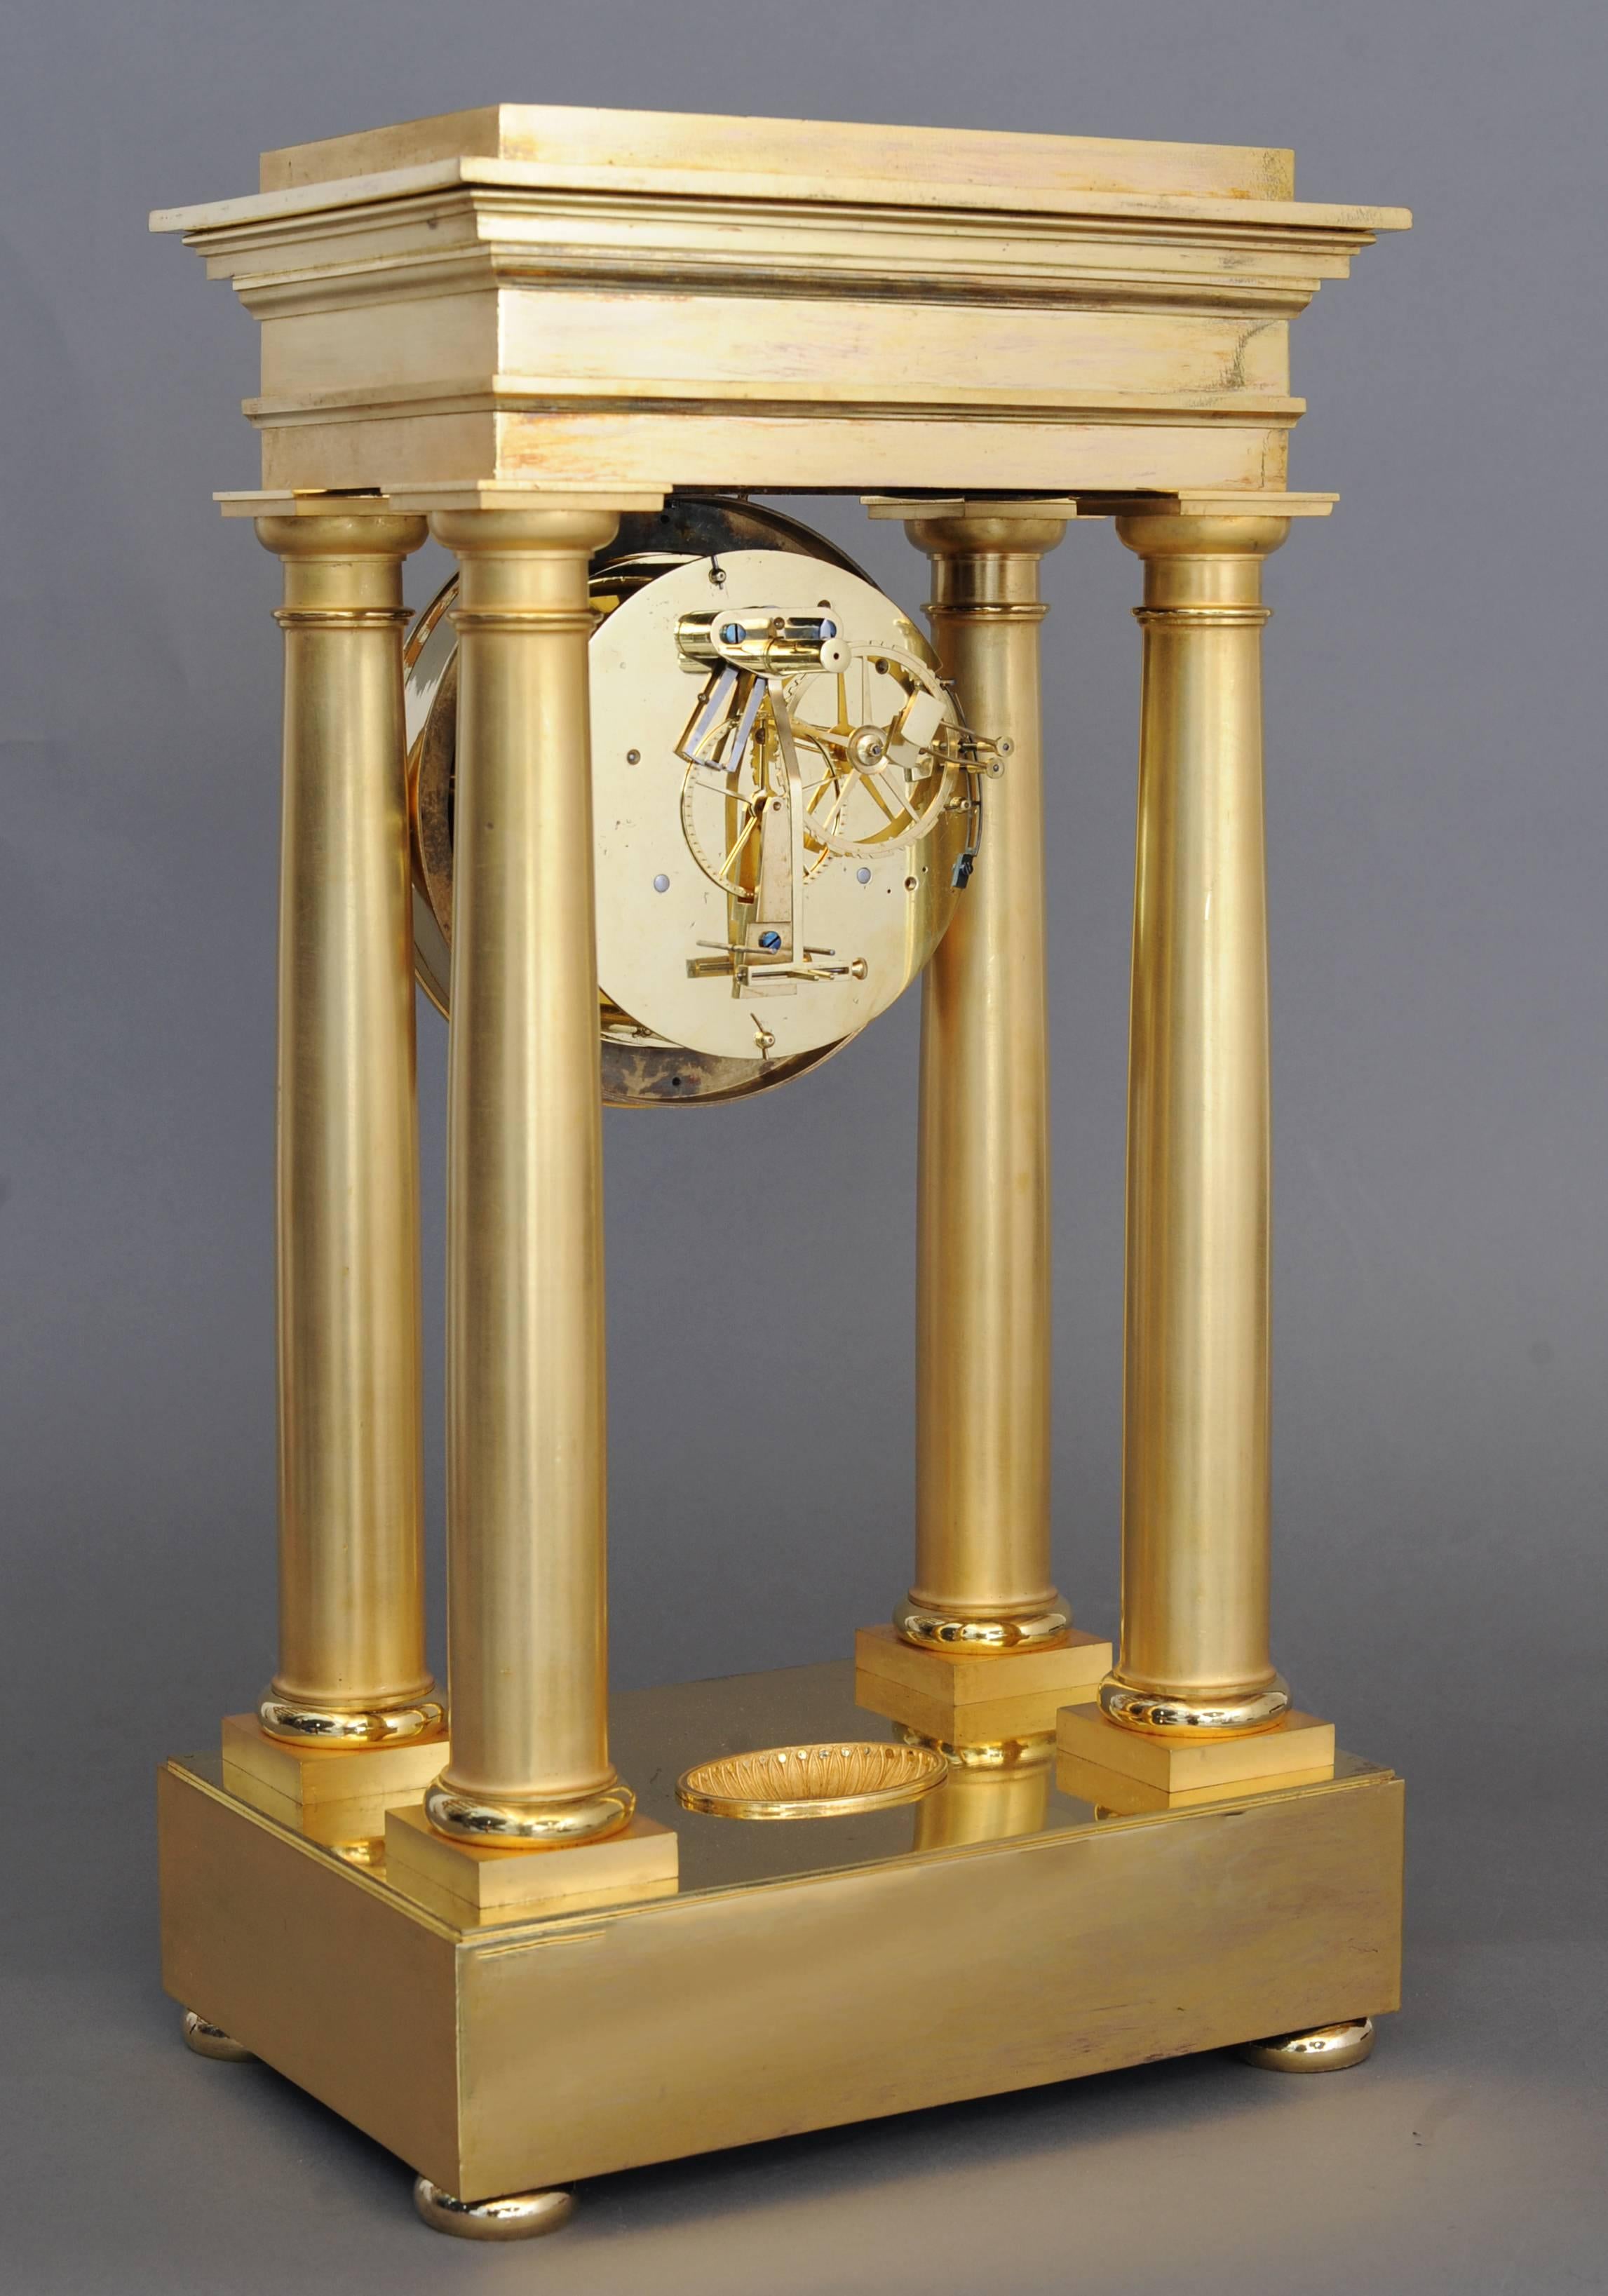 French High Quality Early Empire Four Pillar Mantel Clock by Dieudonné Kinable For Sale